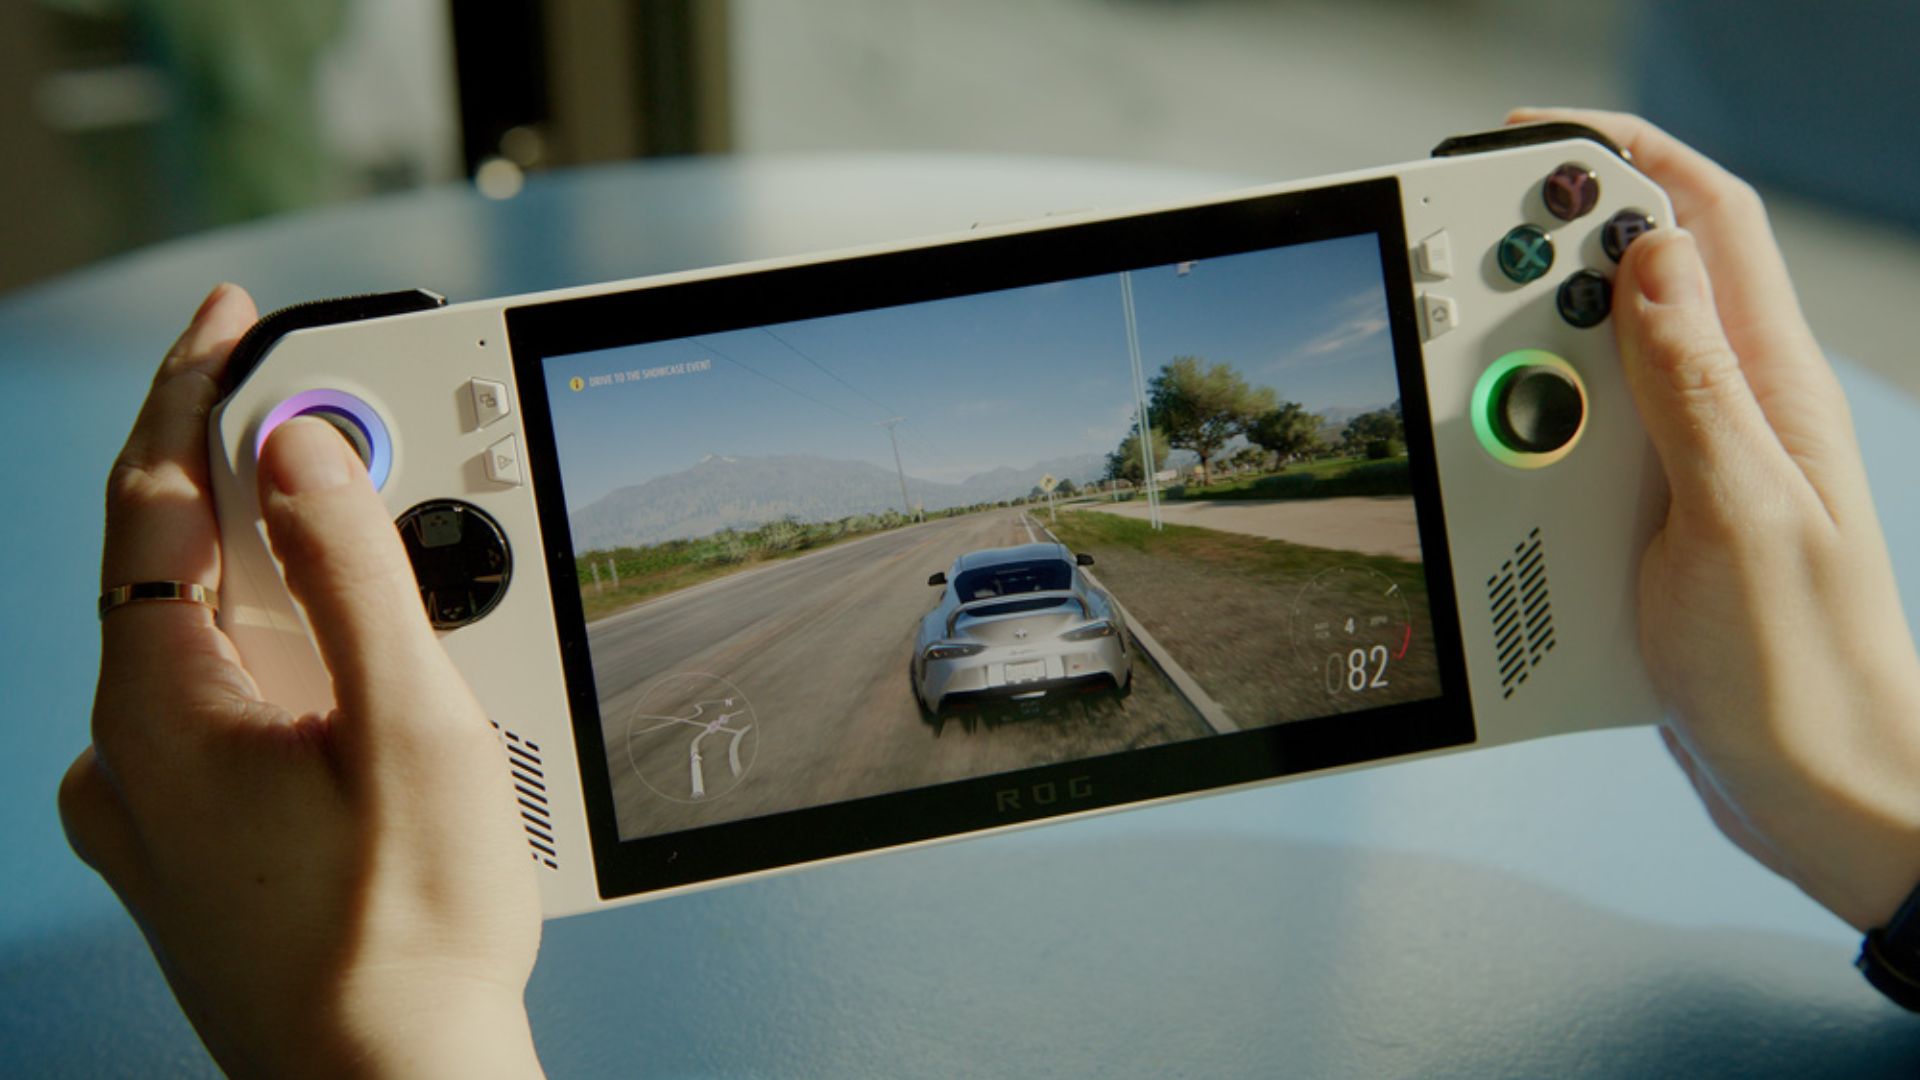 The 10 Best Handheld Game Systems in 2023 - Handheld Consoles